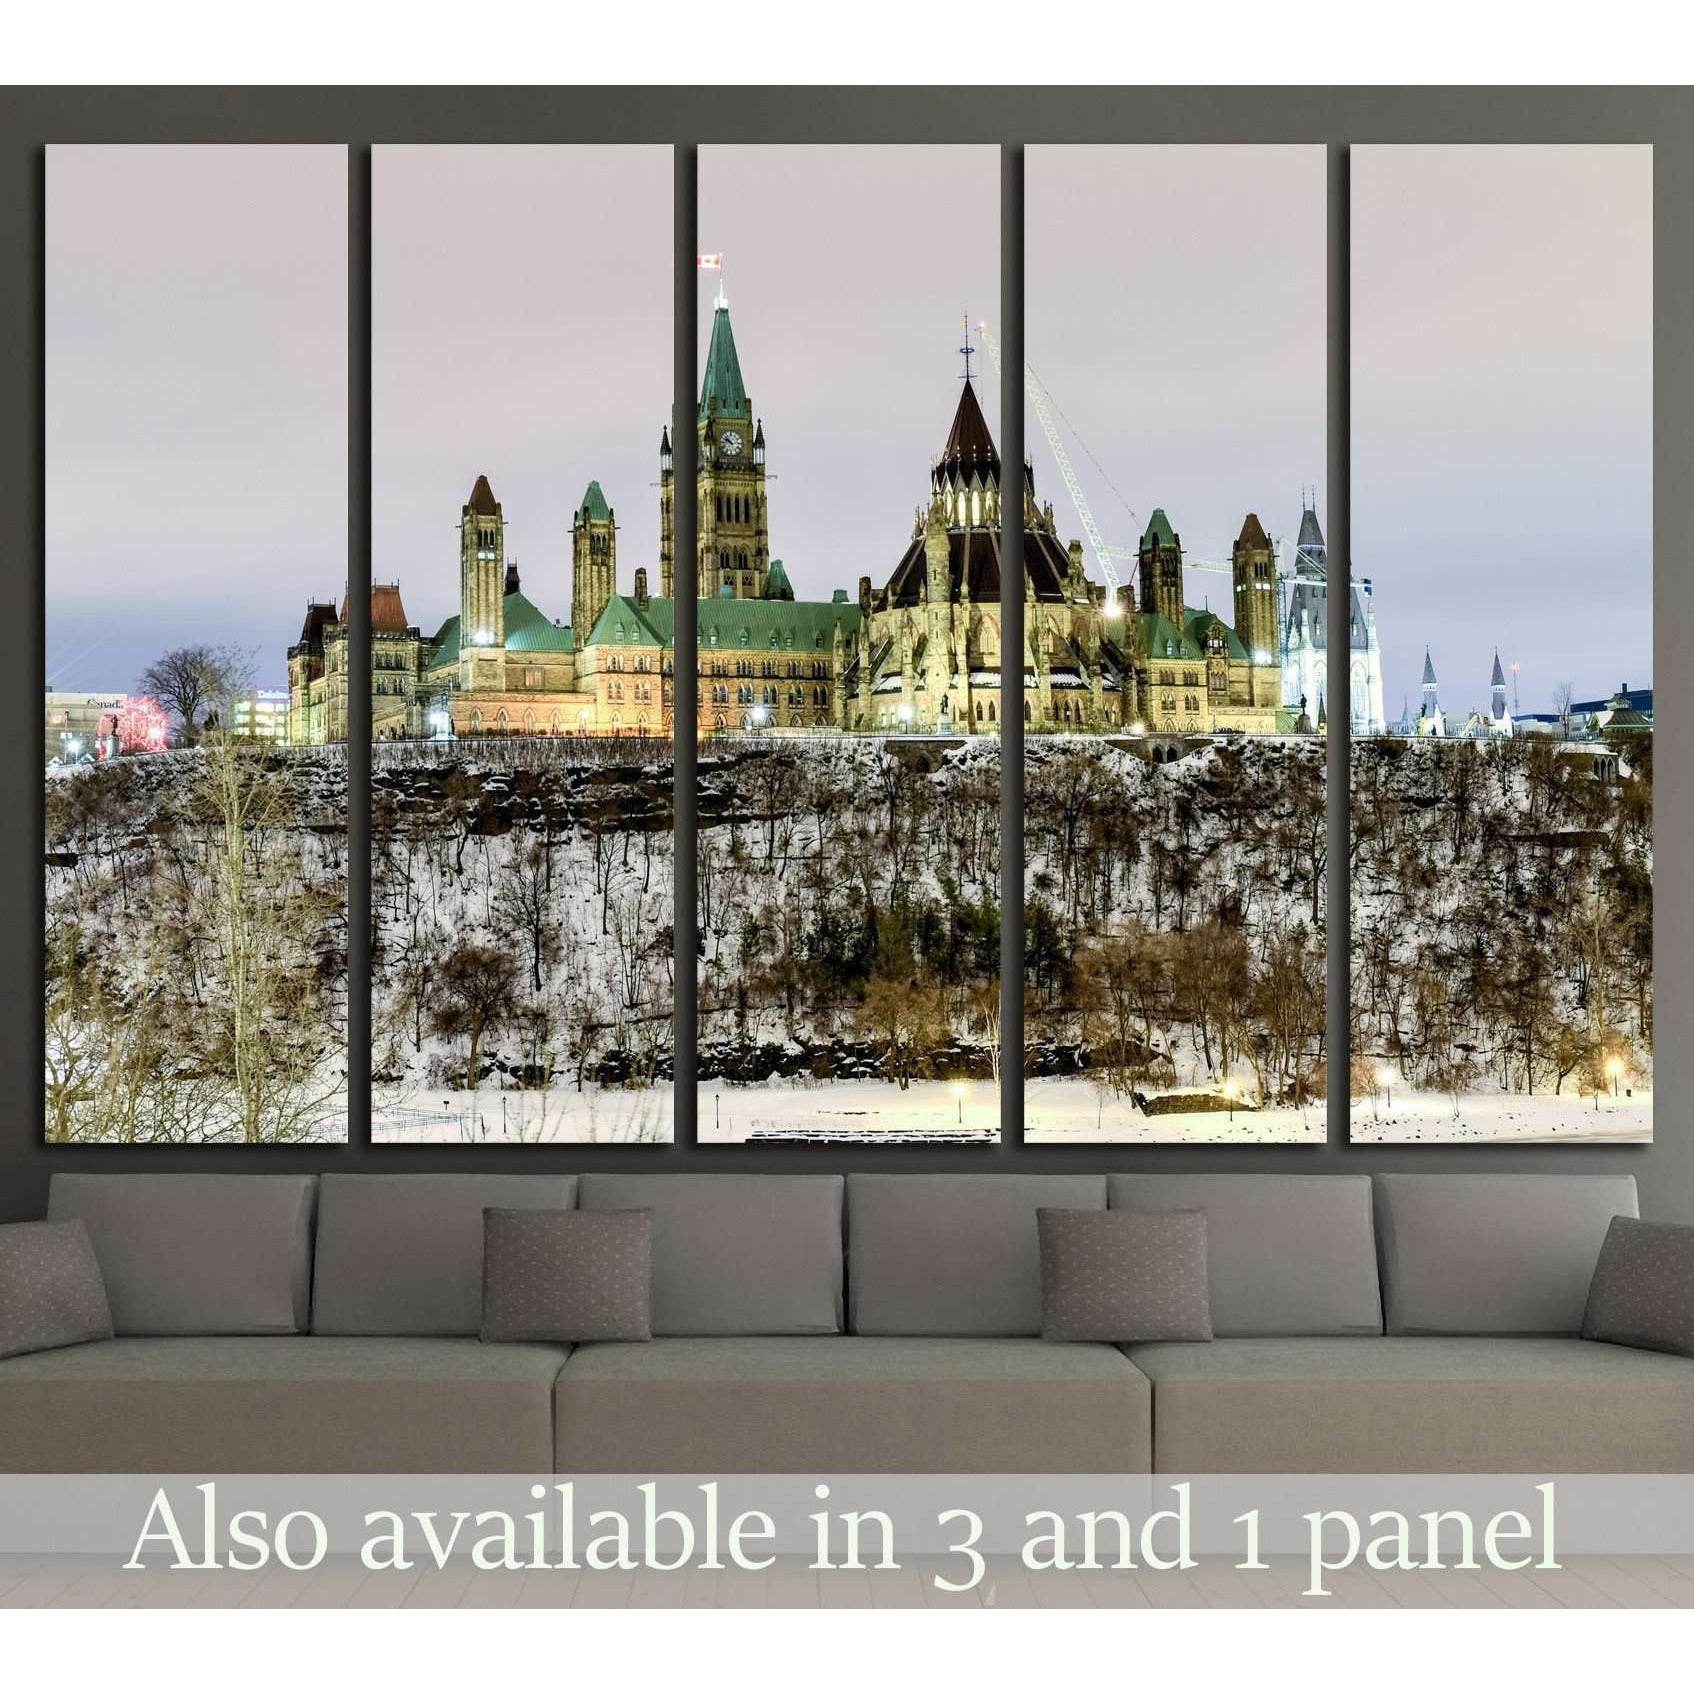 Ottawa, Canada - December 24, 2016 Parliament Hill and the Canadian House of Parliament in Ottawa, Canada during wintertime at night №2018 Ready to Hang Canvas Print